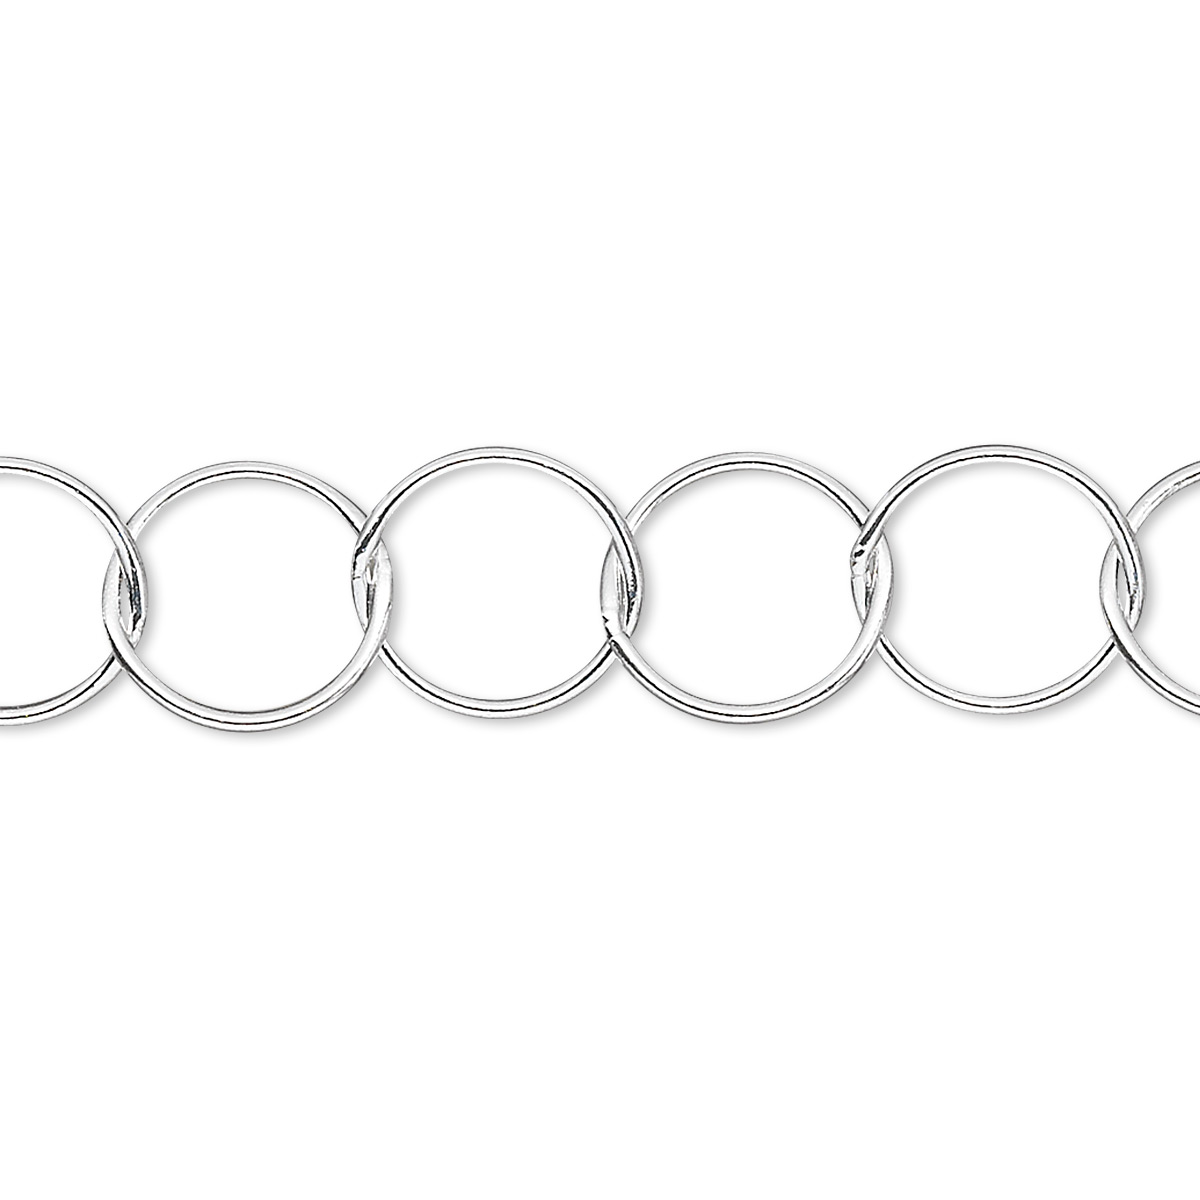 Chain, sterling silver, 11mm round cable, 16 inches with springring ...